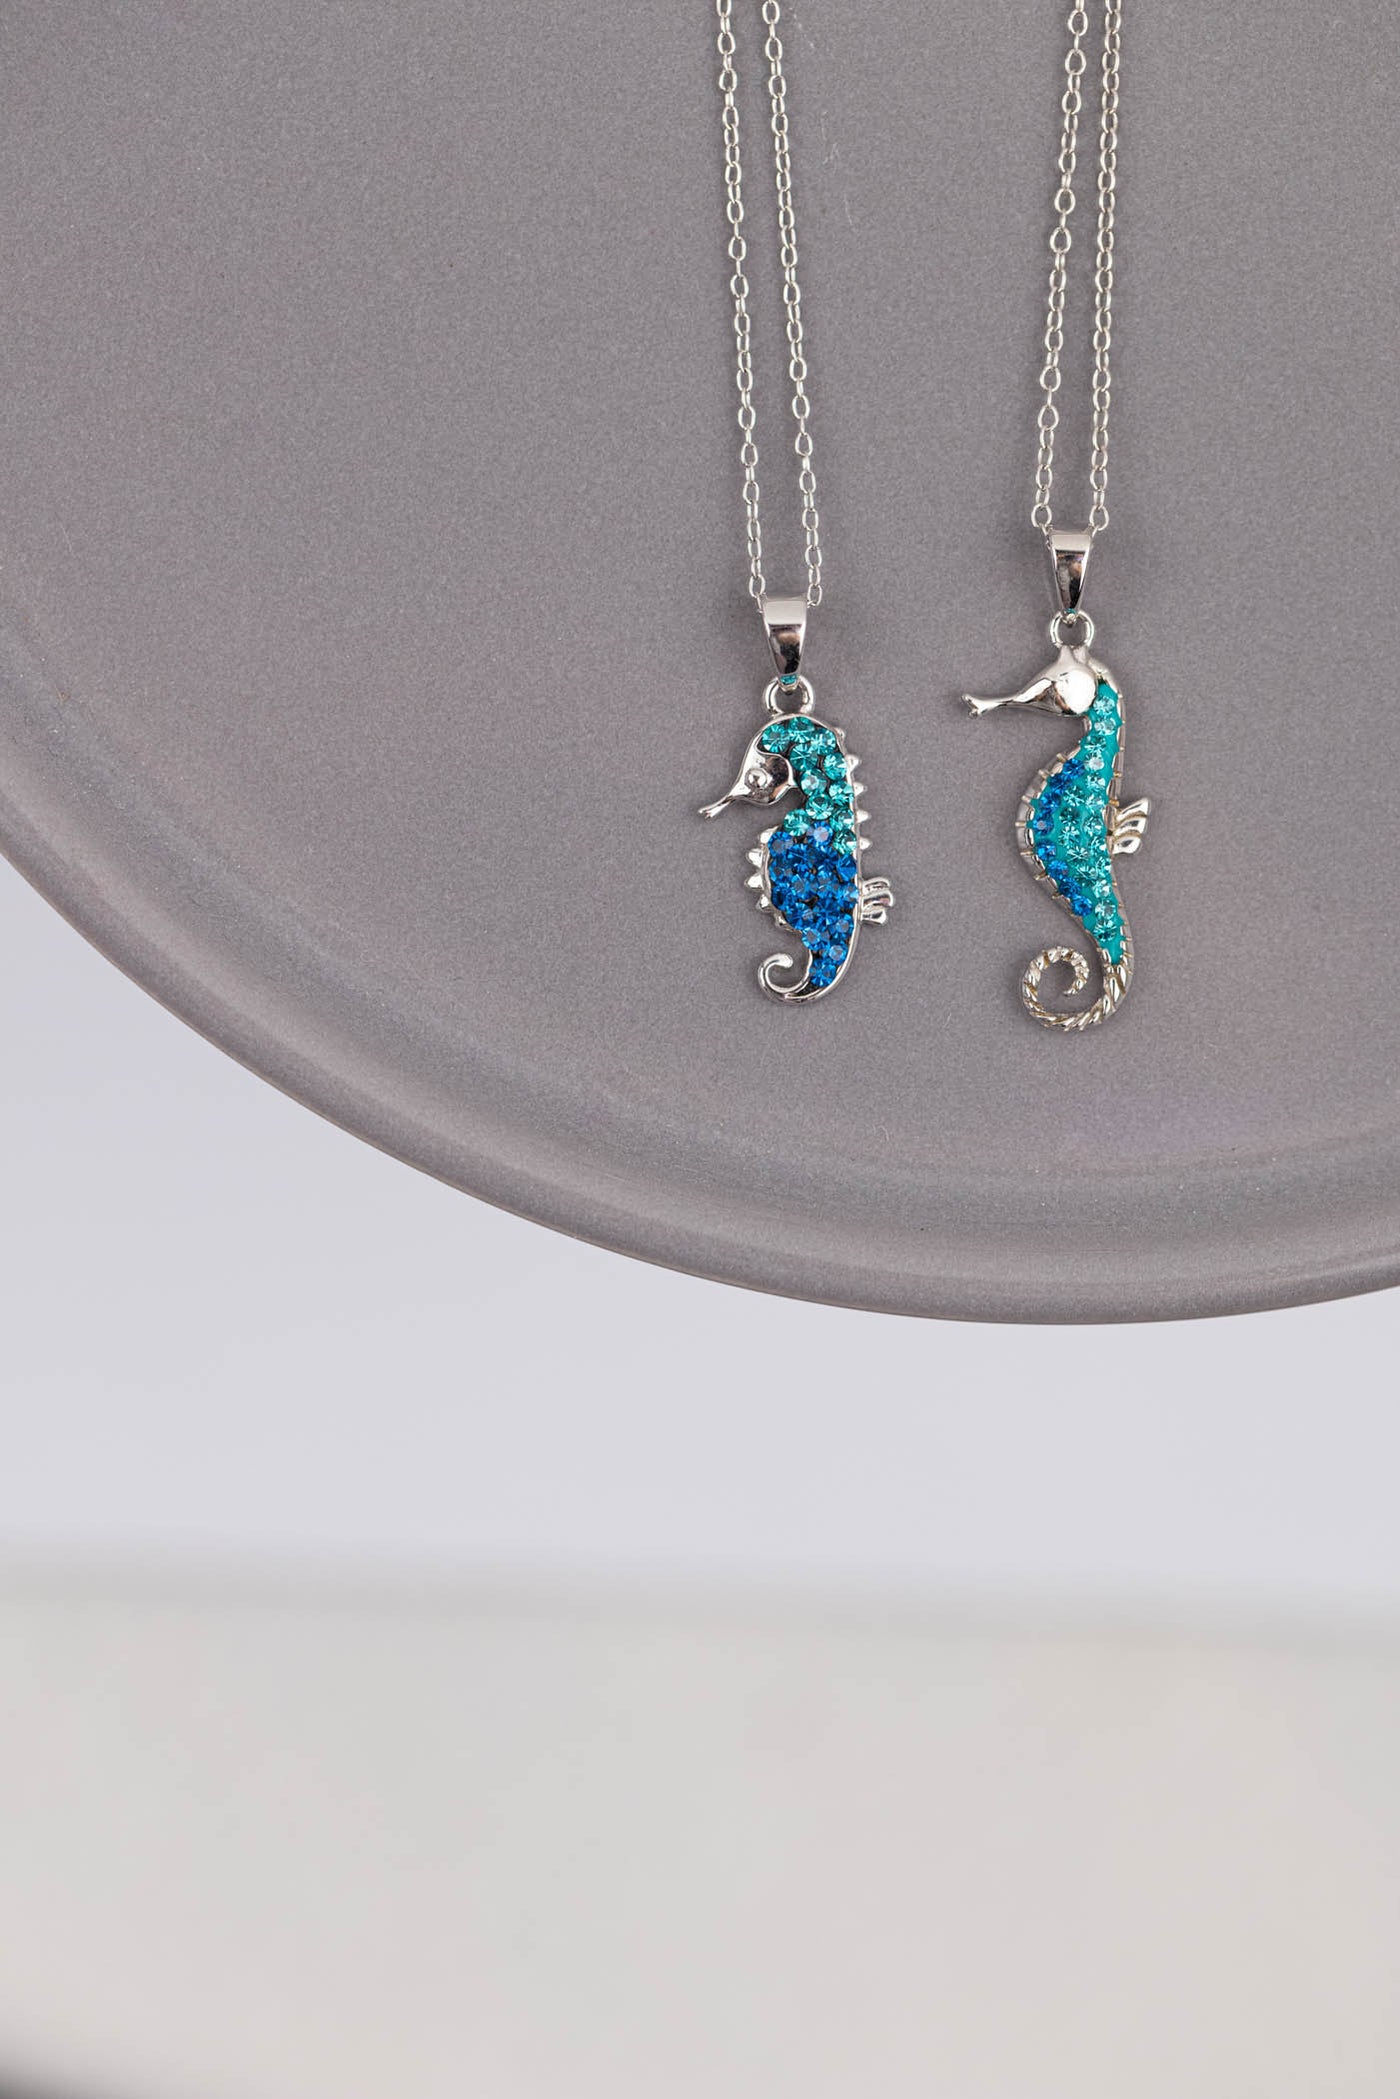 Crystal Seahorse Sterling Silver Pendant Necklace